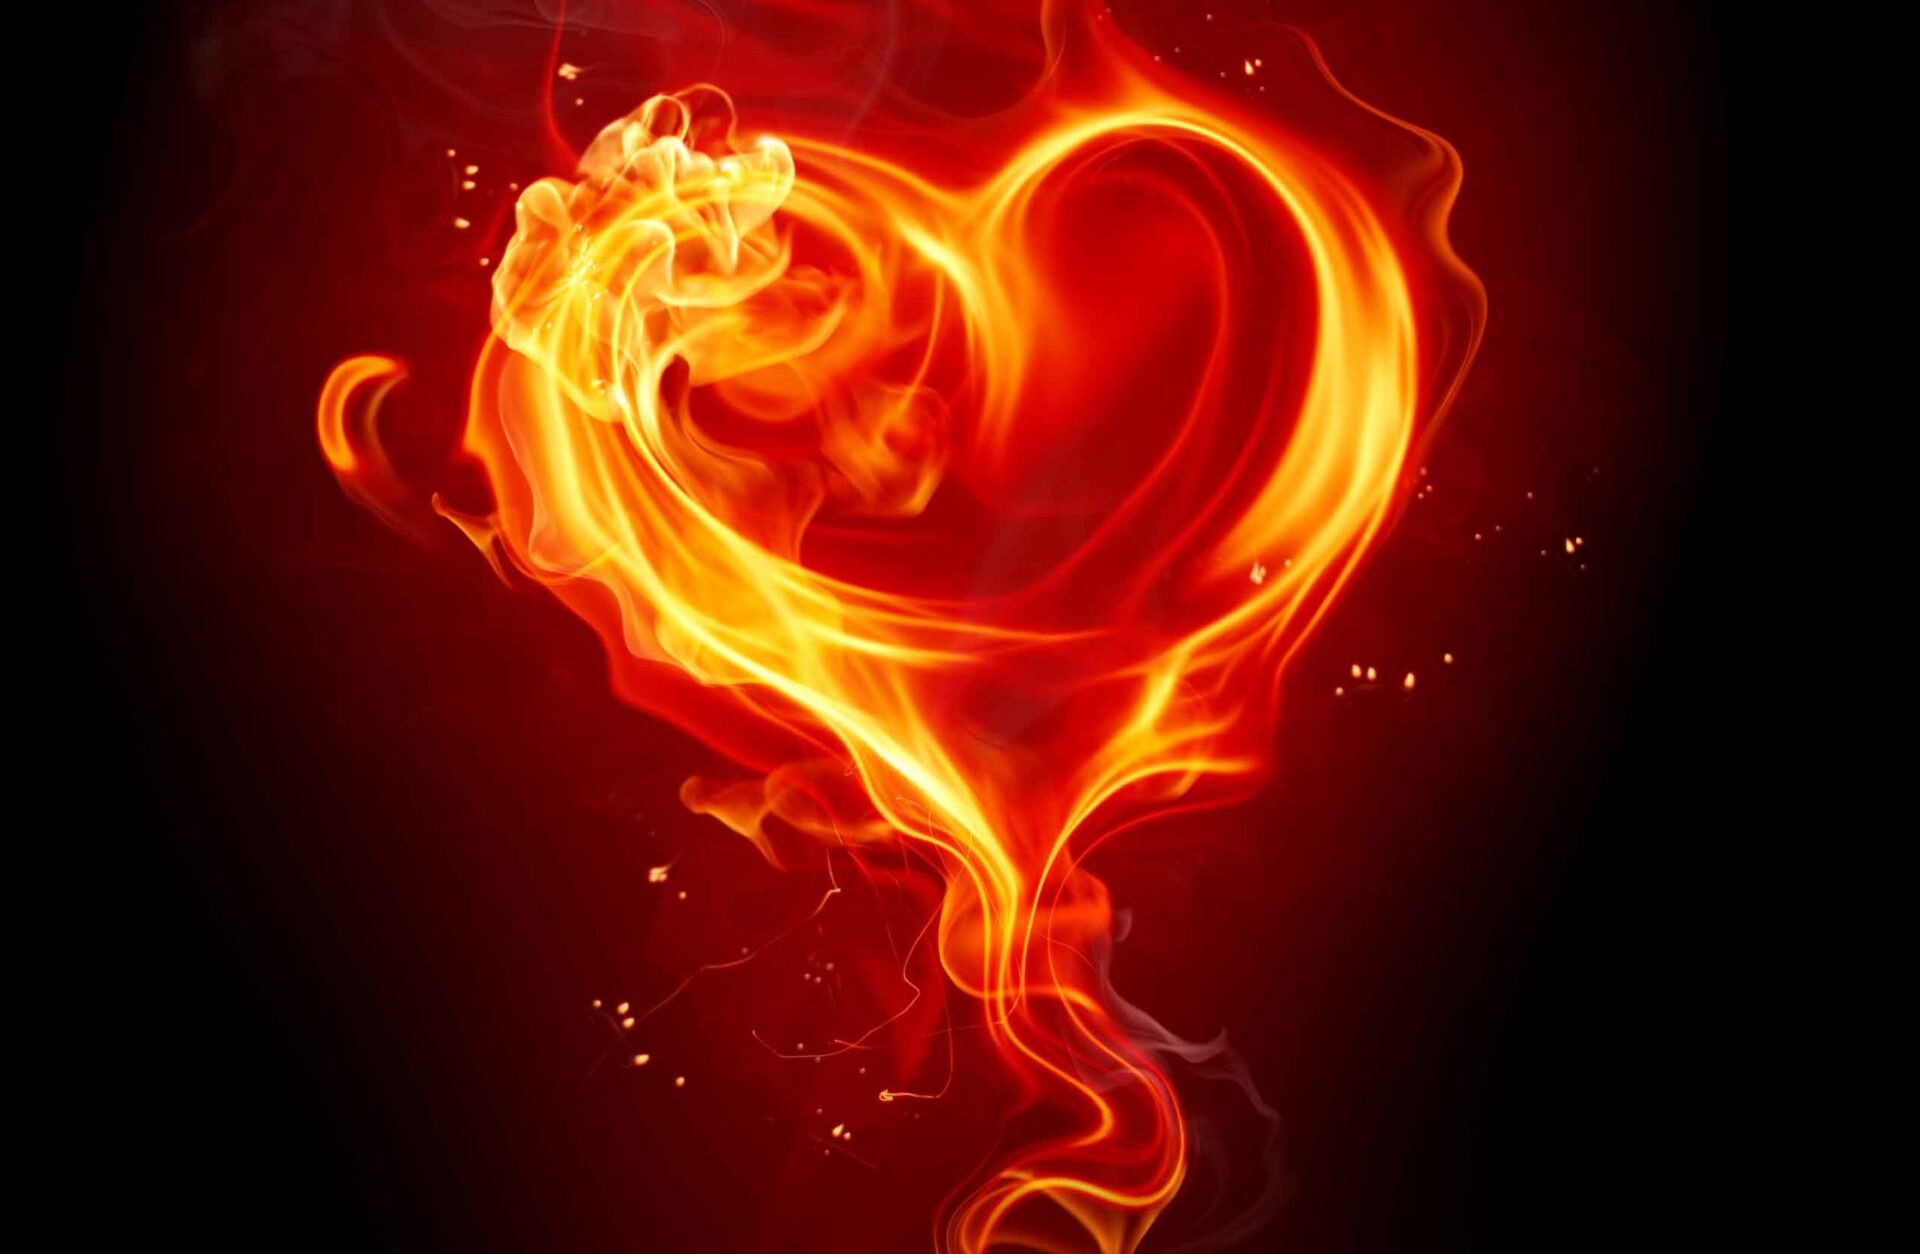 Do I have a twin flame?